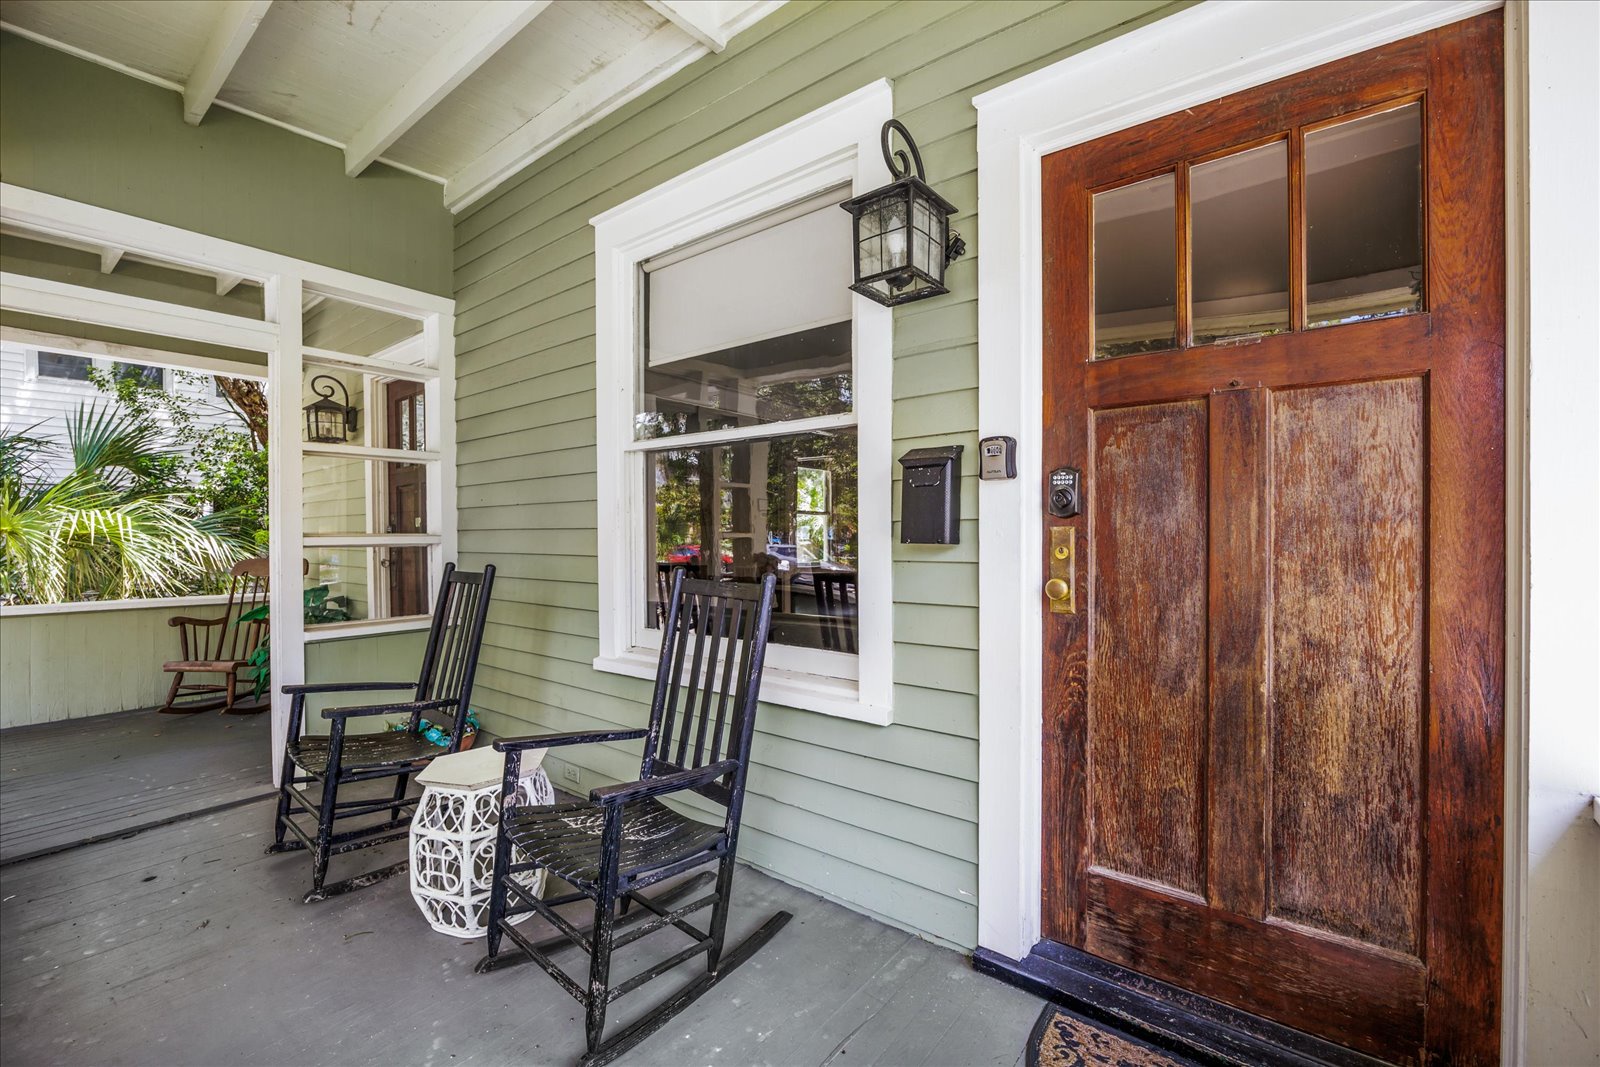 Head into Unit B on the ground level or enjoy the tranquil front porch